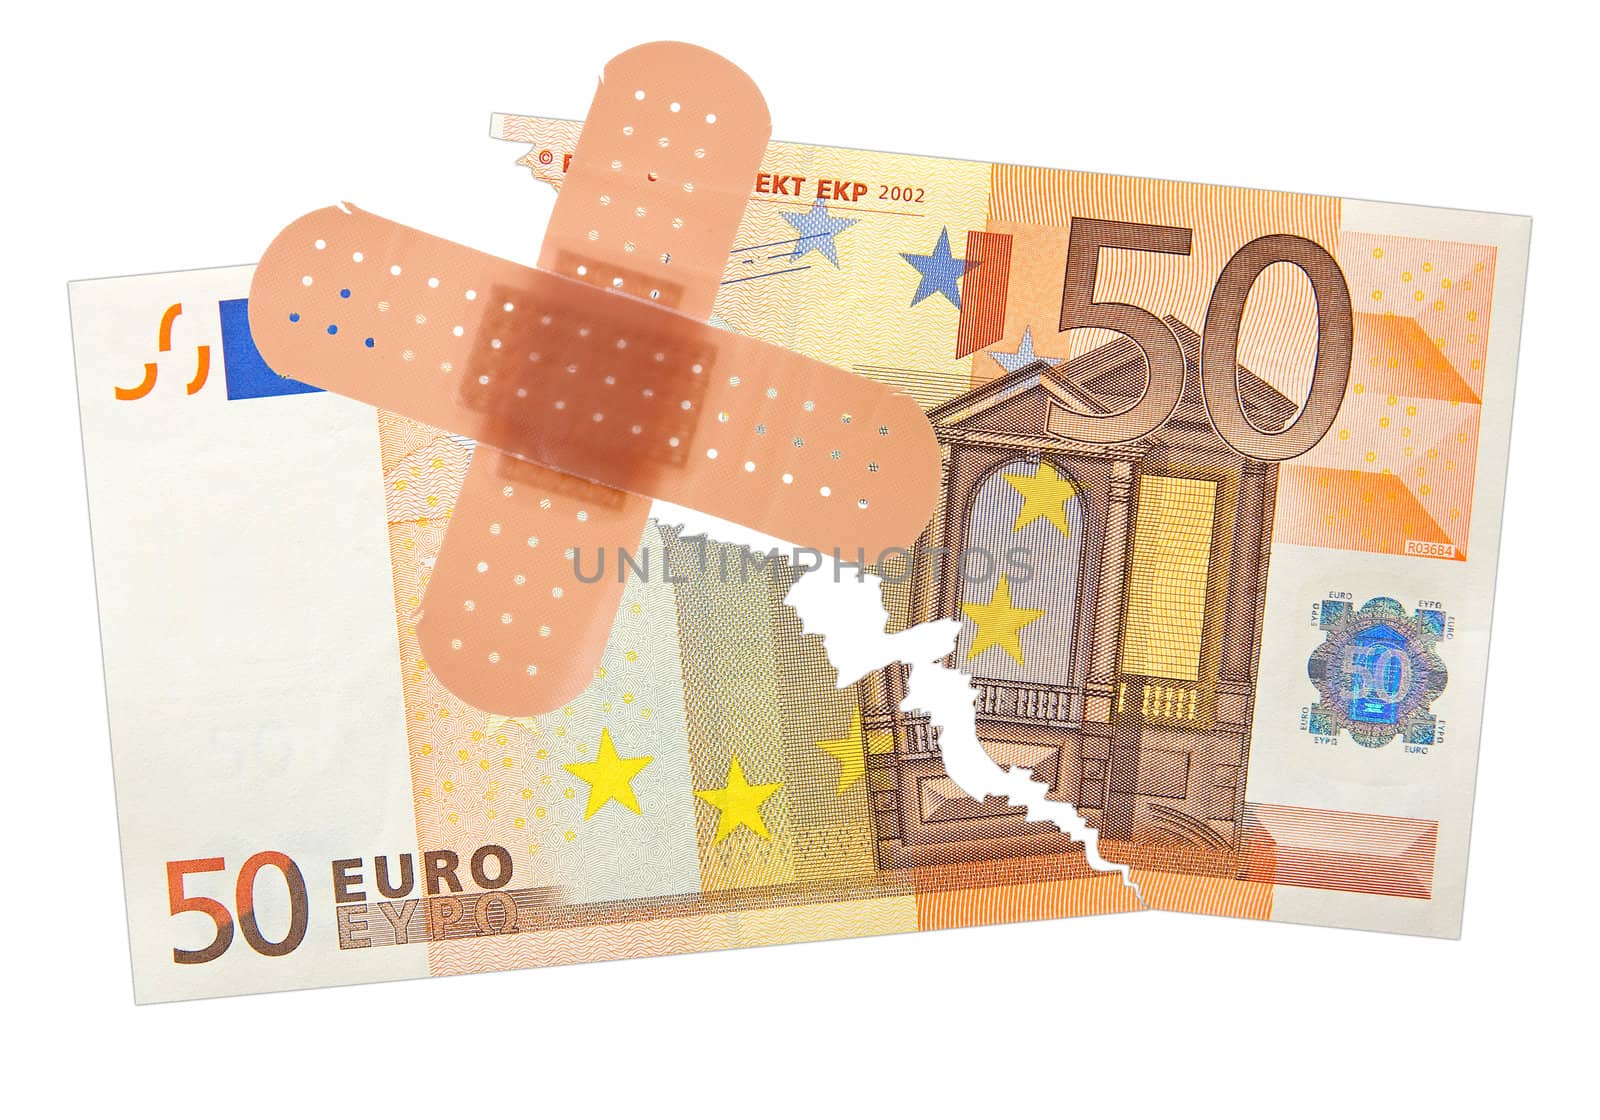 fifty euro banknote taped with a patch